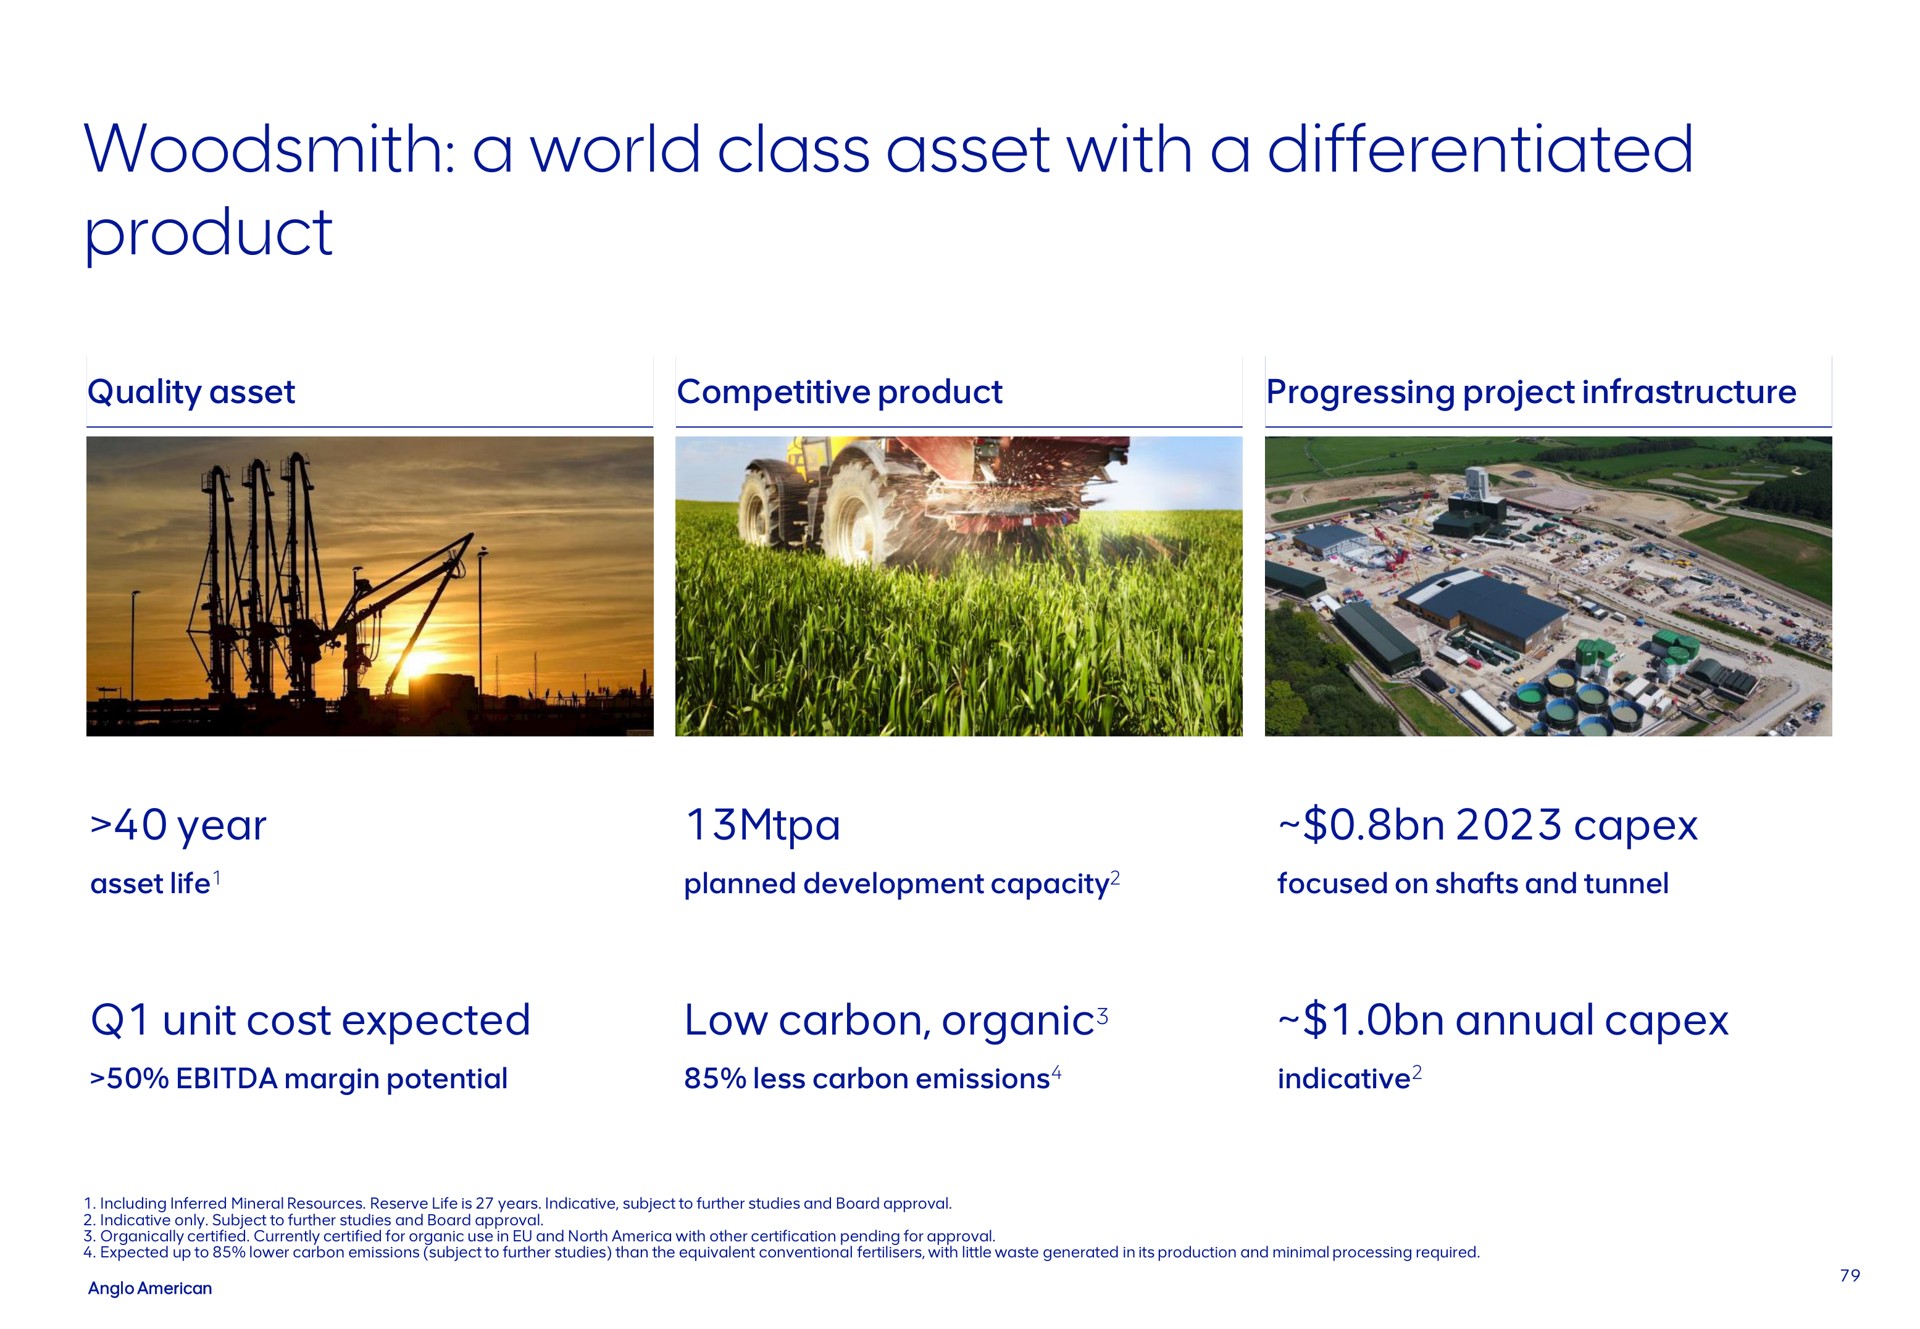 a world class asset with a differentiated product | AngloAmerican